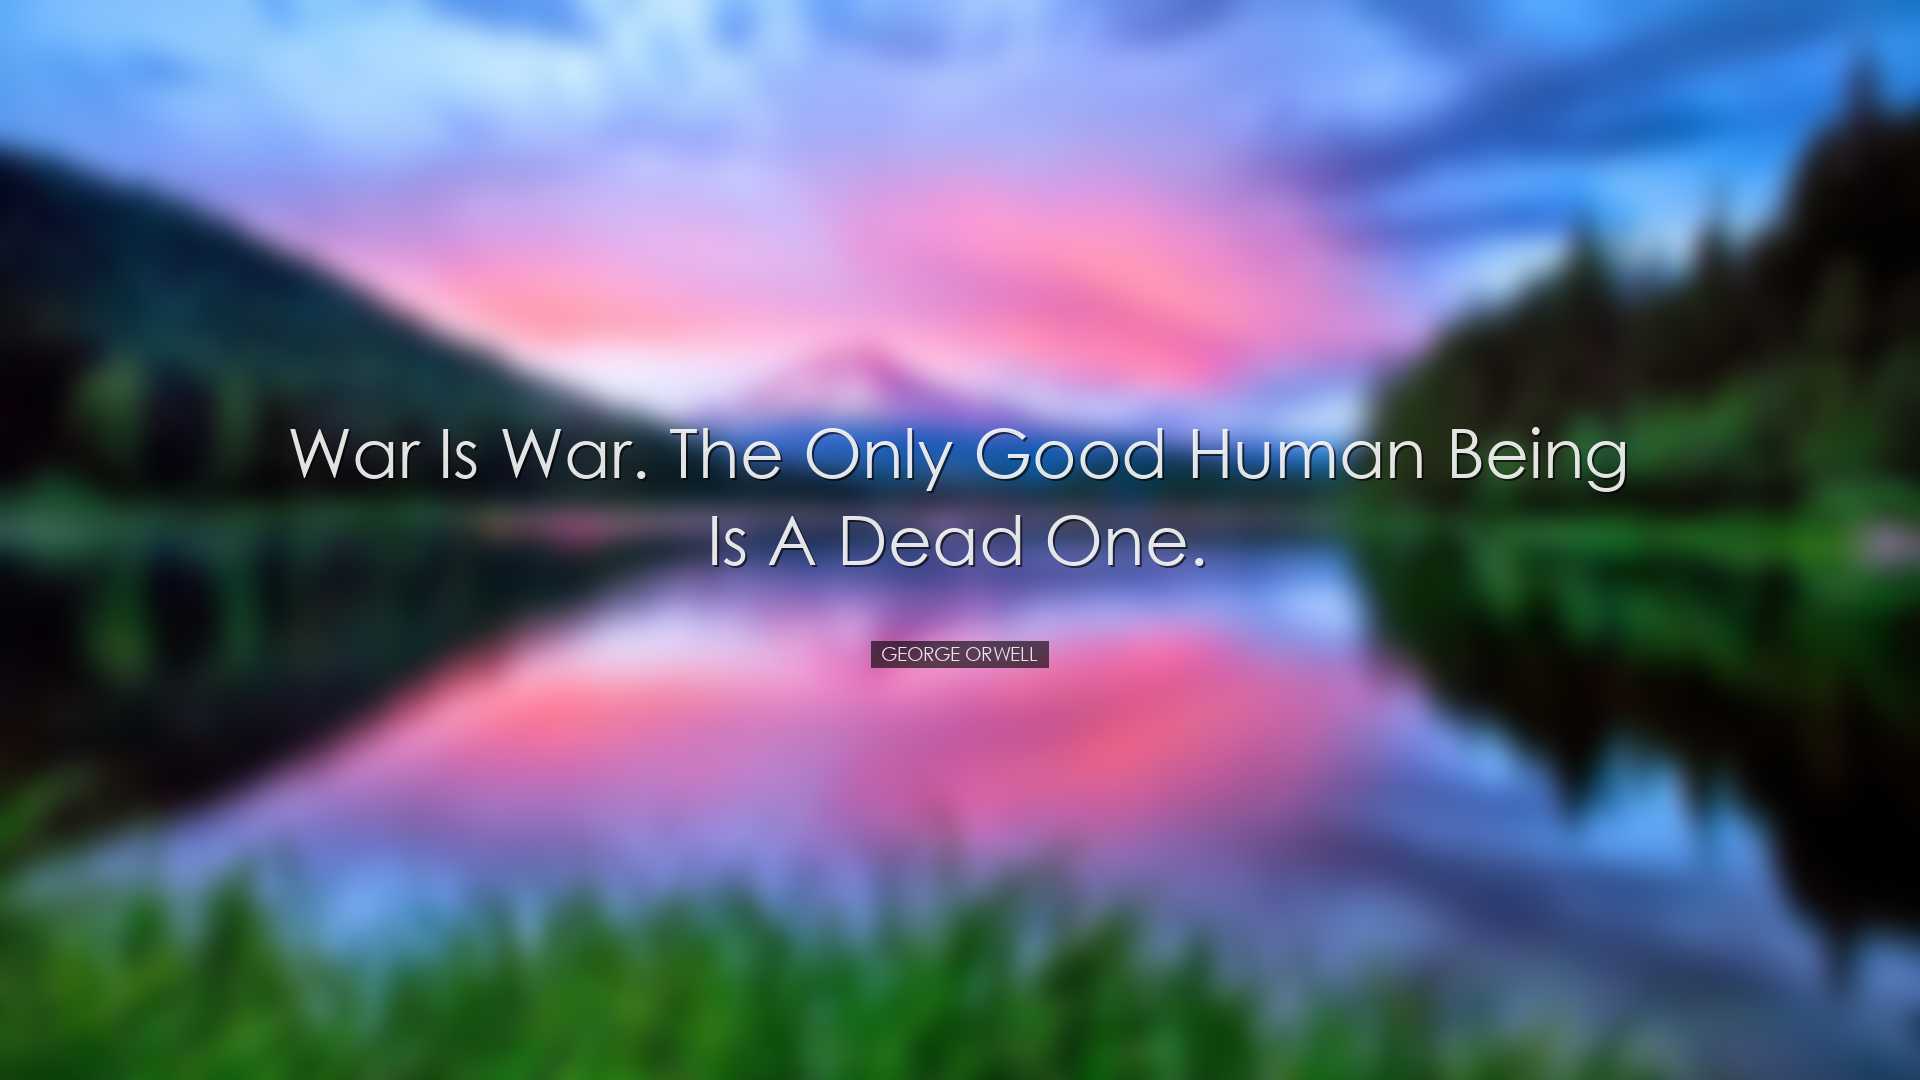 War is war. The only good human being is a dead one. - George Orwe